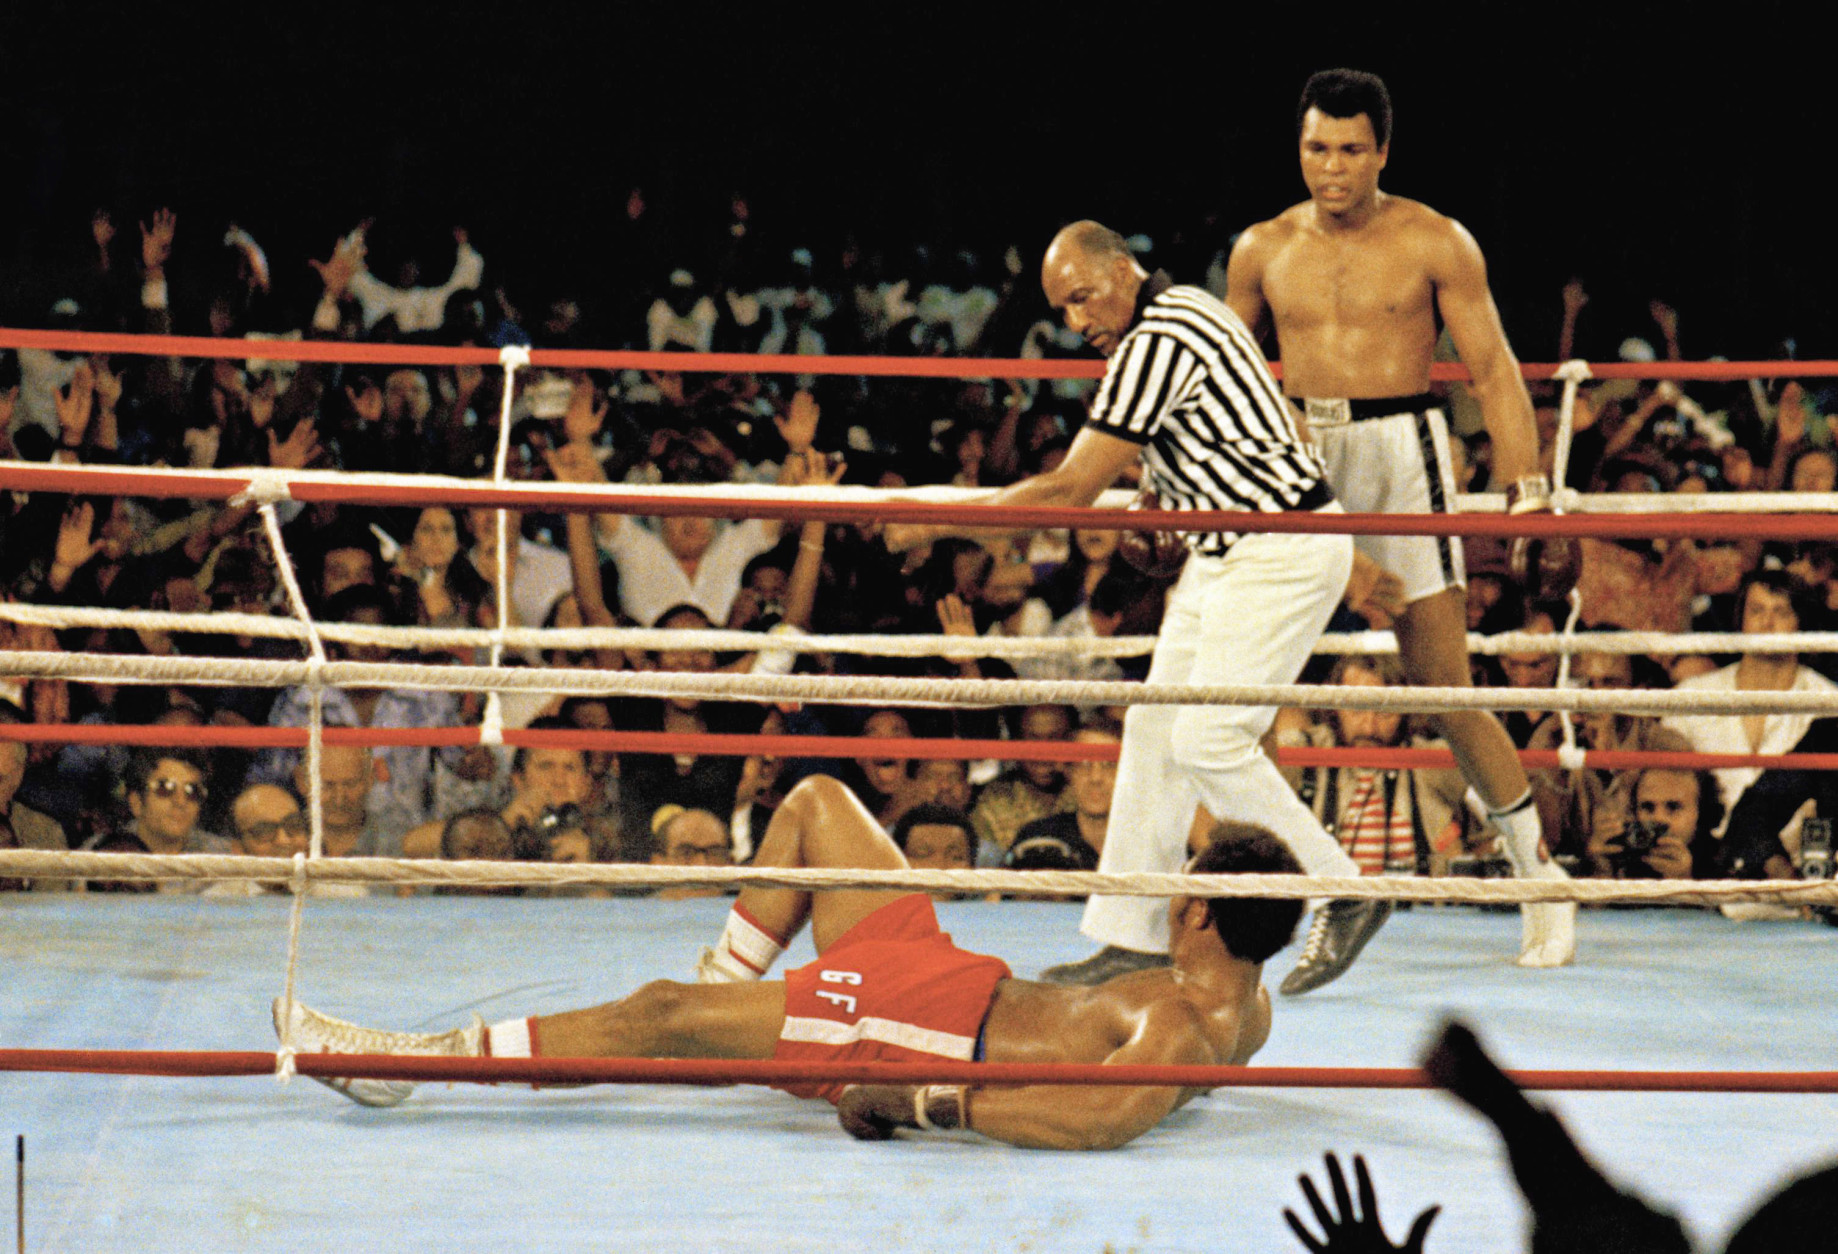 FILE - This is a  Oct. 30, 1974 file photo of Muhammad Ali, right, as he  stands back as referee Zack Clayton calls the count over opponent George Foreman, red shorts, in Kinshasa, Zaire.  Ali won the fight in Africa by a knock out in the 8th round. It was 40 years ago that two men met just before dawn on Oct. 30, 1974, to earn $5 million in the Rumble in the Jungle. In one of boxing's most memorable moments, Muhammad Ali stopped the fearsome George Foreman to recapture the heavyweight title in the impoverished African nation of Zaire. (AP Photo, File)